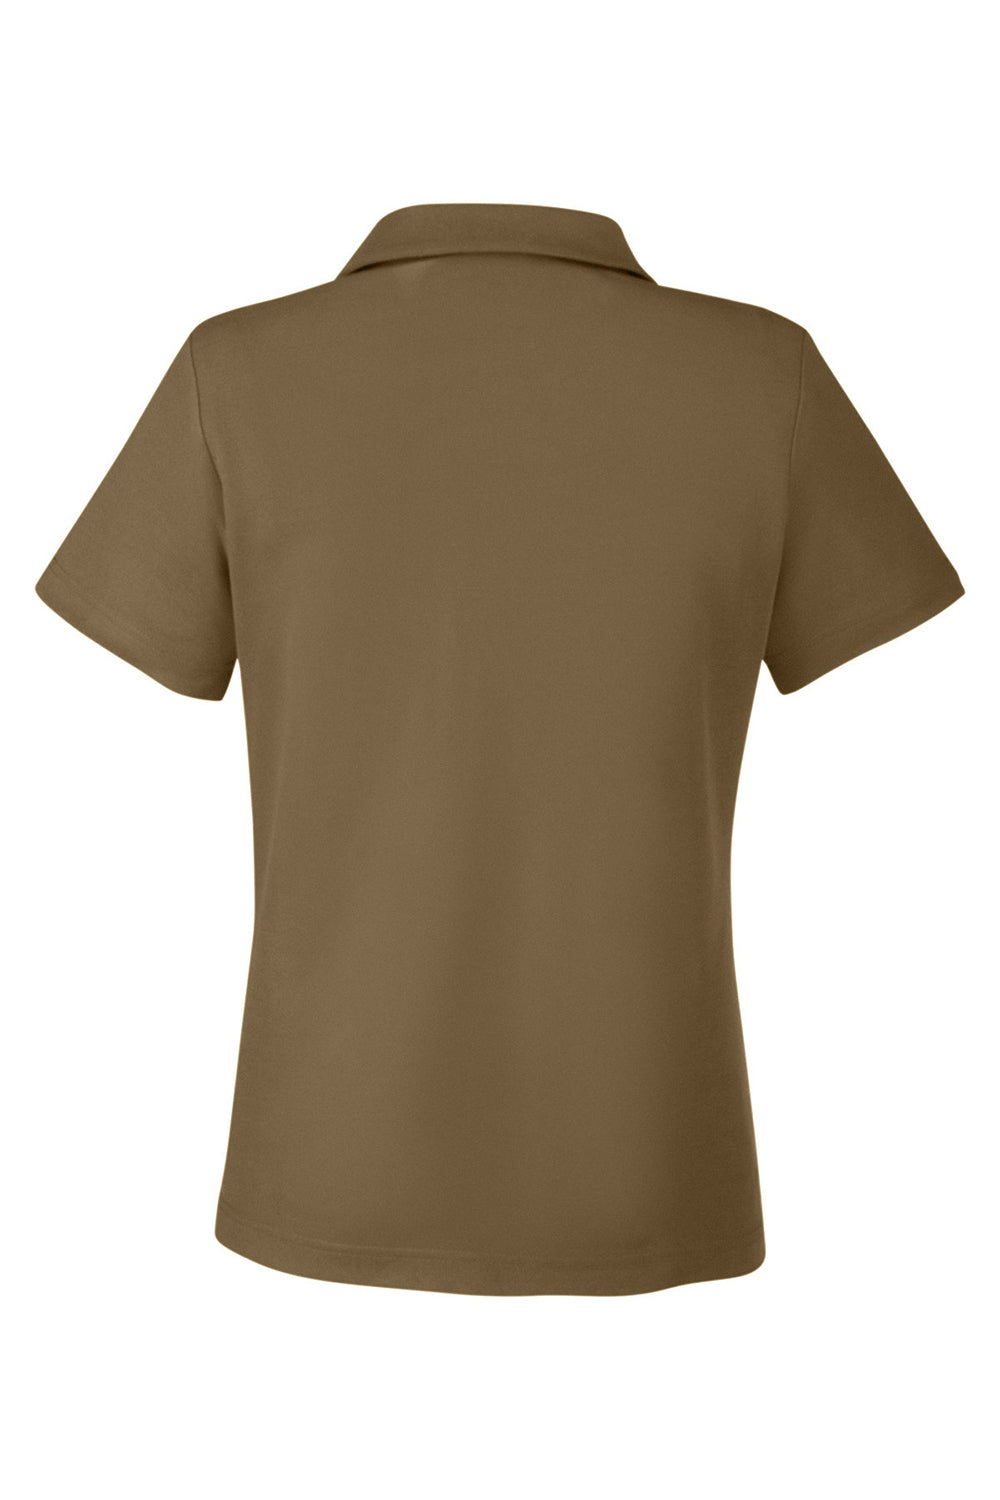 Core 365 CE112W Womens Fusion ChromaSoft Performance Moisture Wicking Pique Short Sleeve Polo Shirt Coyote Brown Flat Back